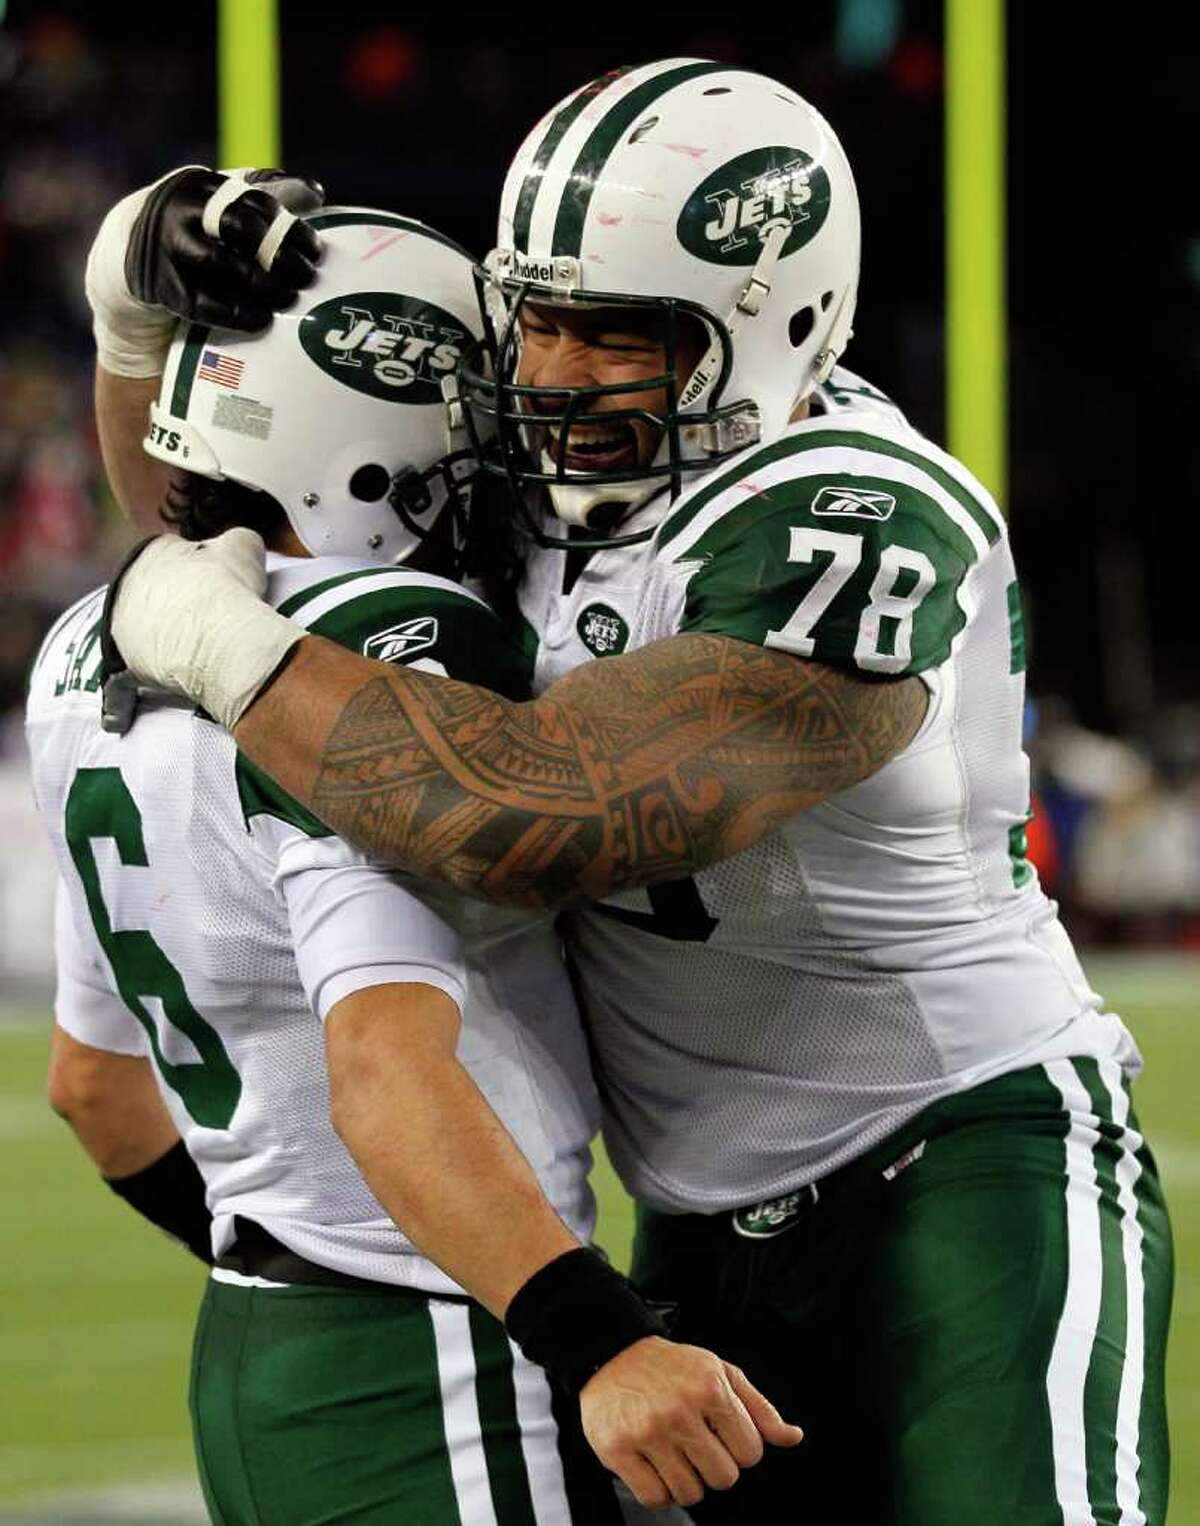 FOXBORO, MA - JANUARY 16: Mark Sanchez #6 of the New York Jets and Wayne Hunter #78 celebrate on their way to defeating the New England Patriots 28 to 21 victory over the New England Patriots during their 2011 AFC divisional playoff game at Gillette Stadium on January 16, 2011 in Foxboro, Massachusetts. (Photo by Jim Rogash/Getty Images) *** Local Caption *** Mark Sanchez;Wayne Hunter